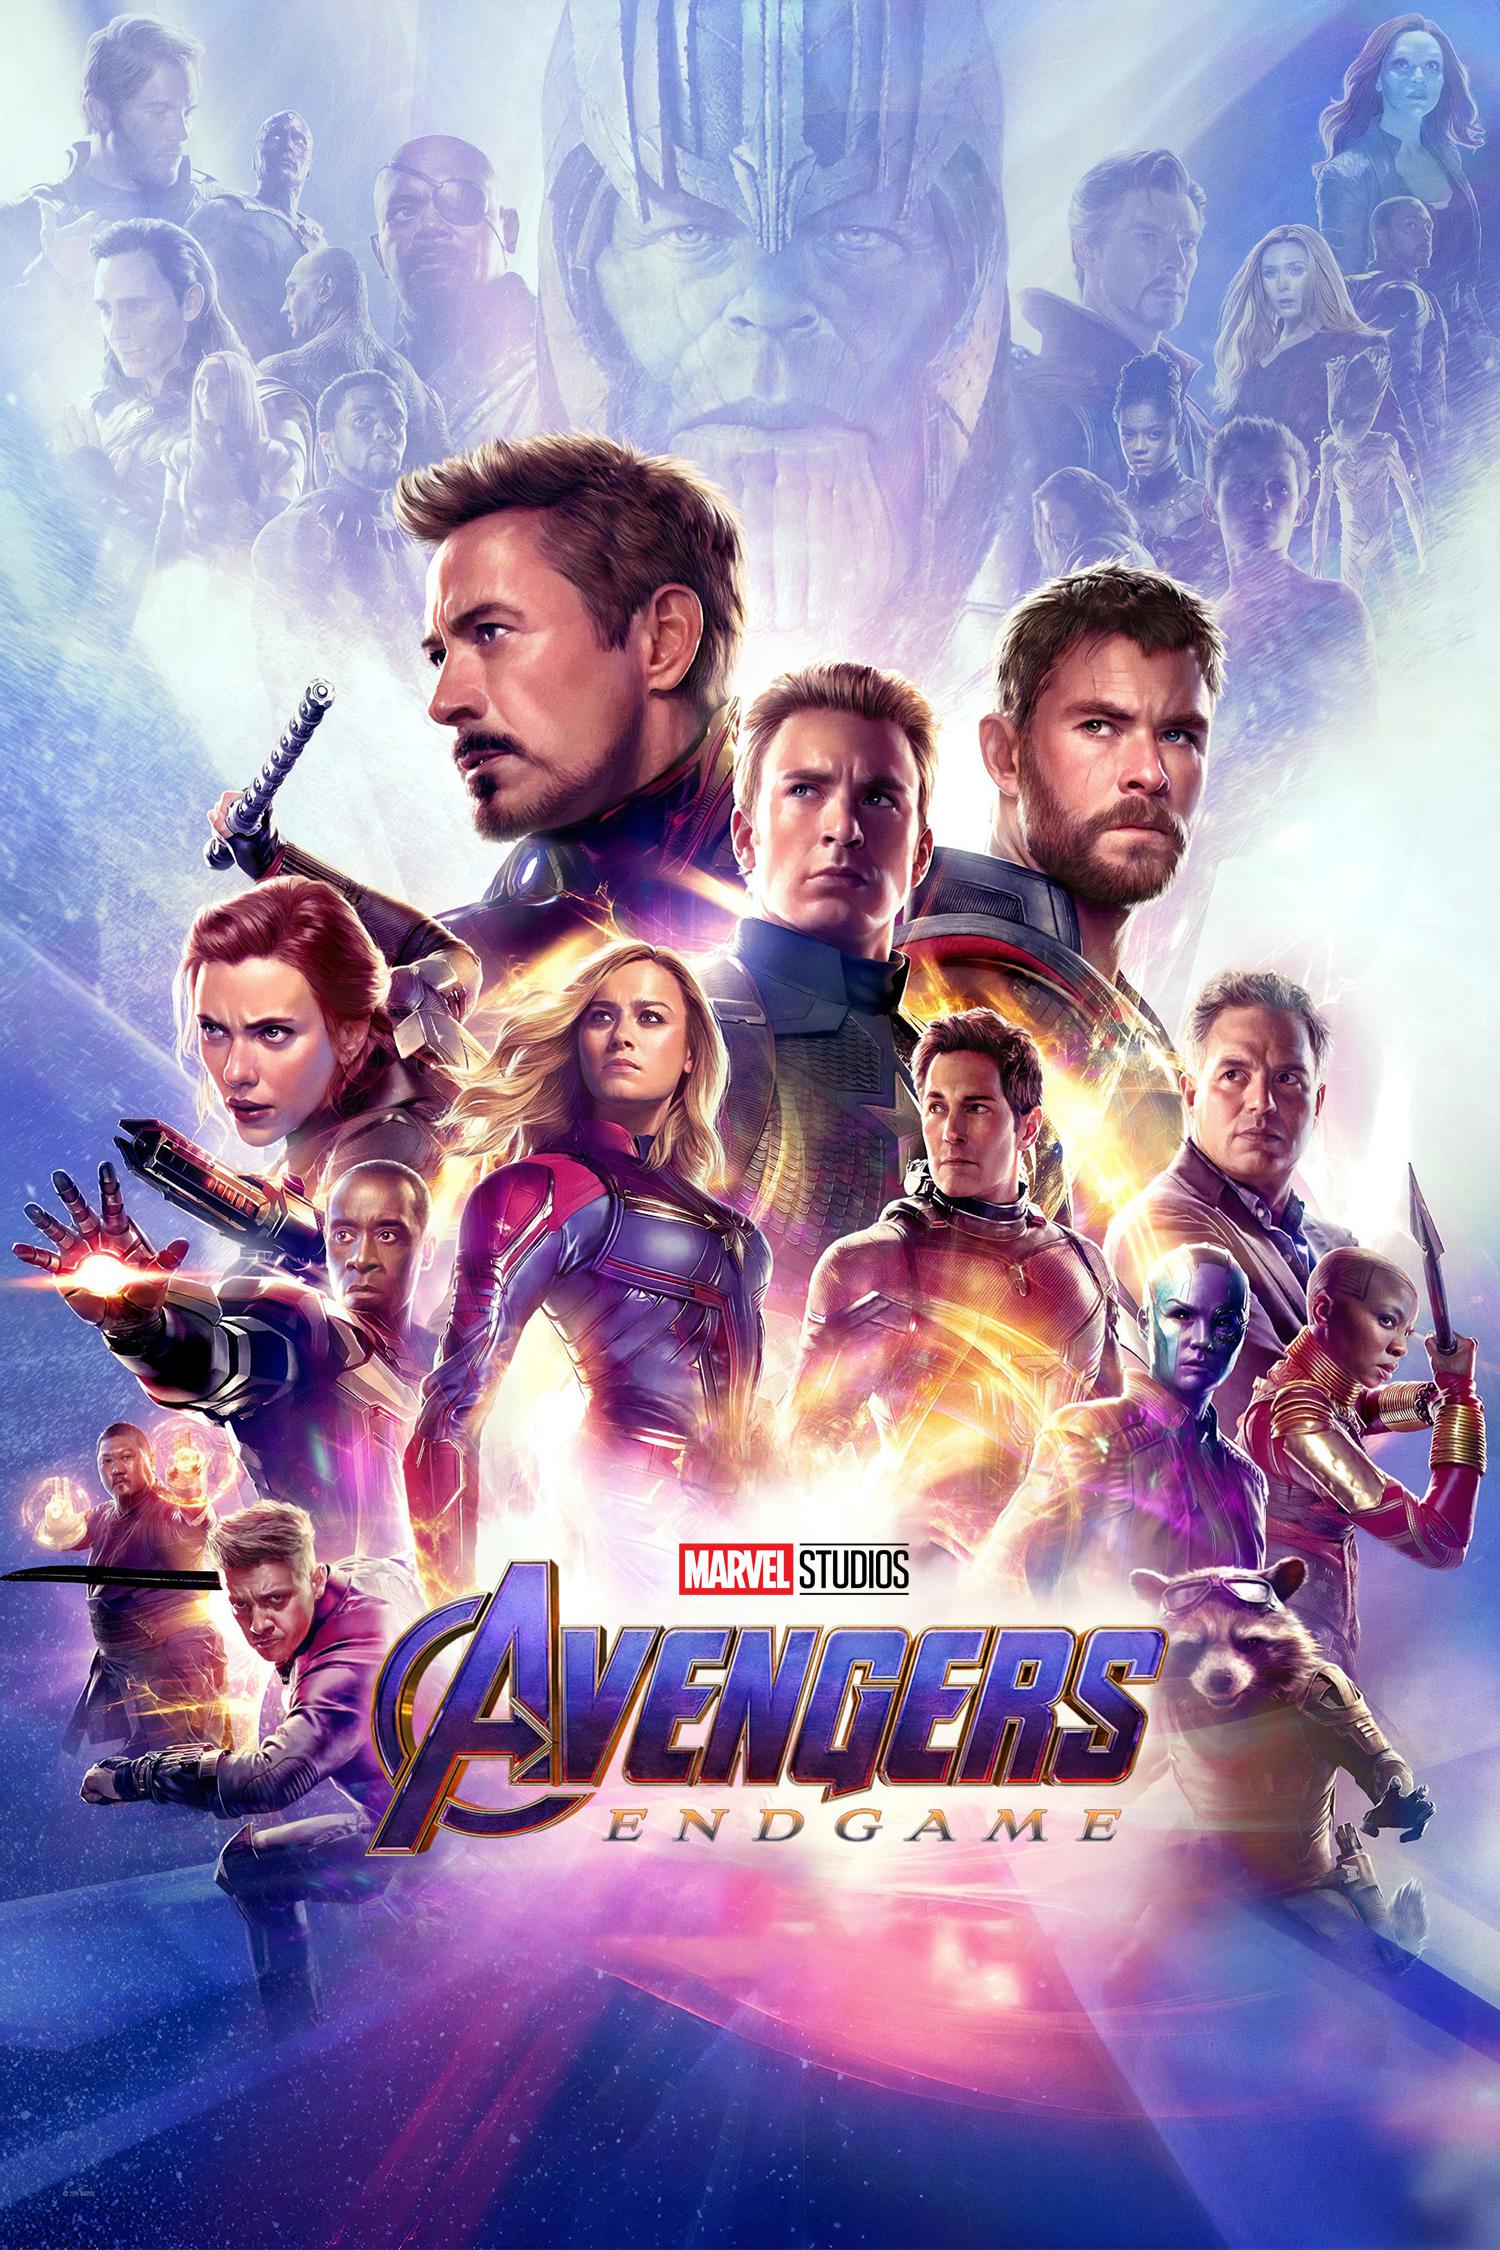 Avengers Endgame movie DVD release date, plot, cast and title, ENDGAME  announced as sequel to Infinity War